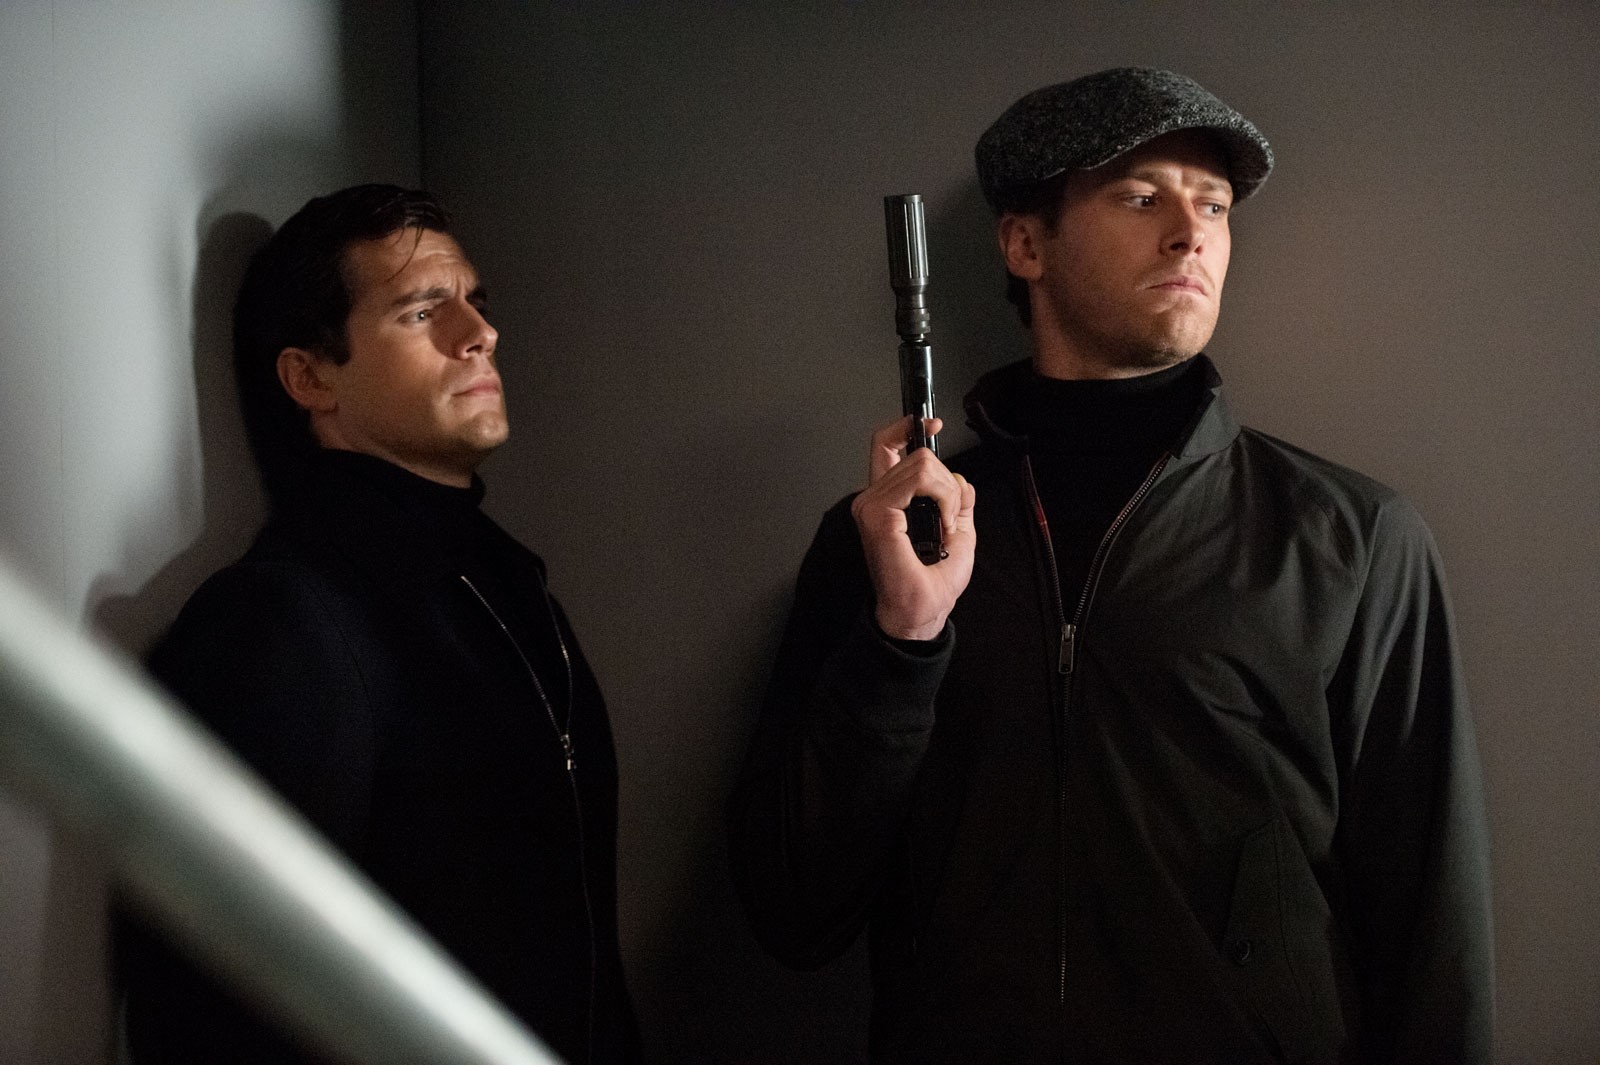 Henry Cavill stars as Napoleon Solo and Armie Hammer stars as Illya Kuryakin in Warner Bros. Pictures' The Man from U.N.C.L.E. (2015)